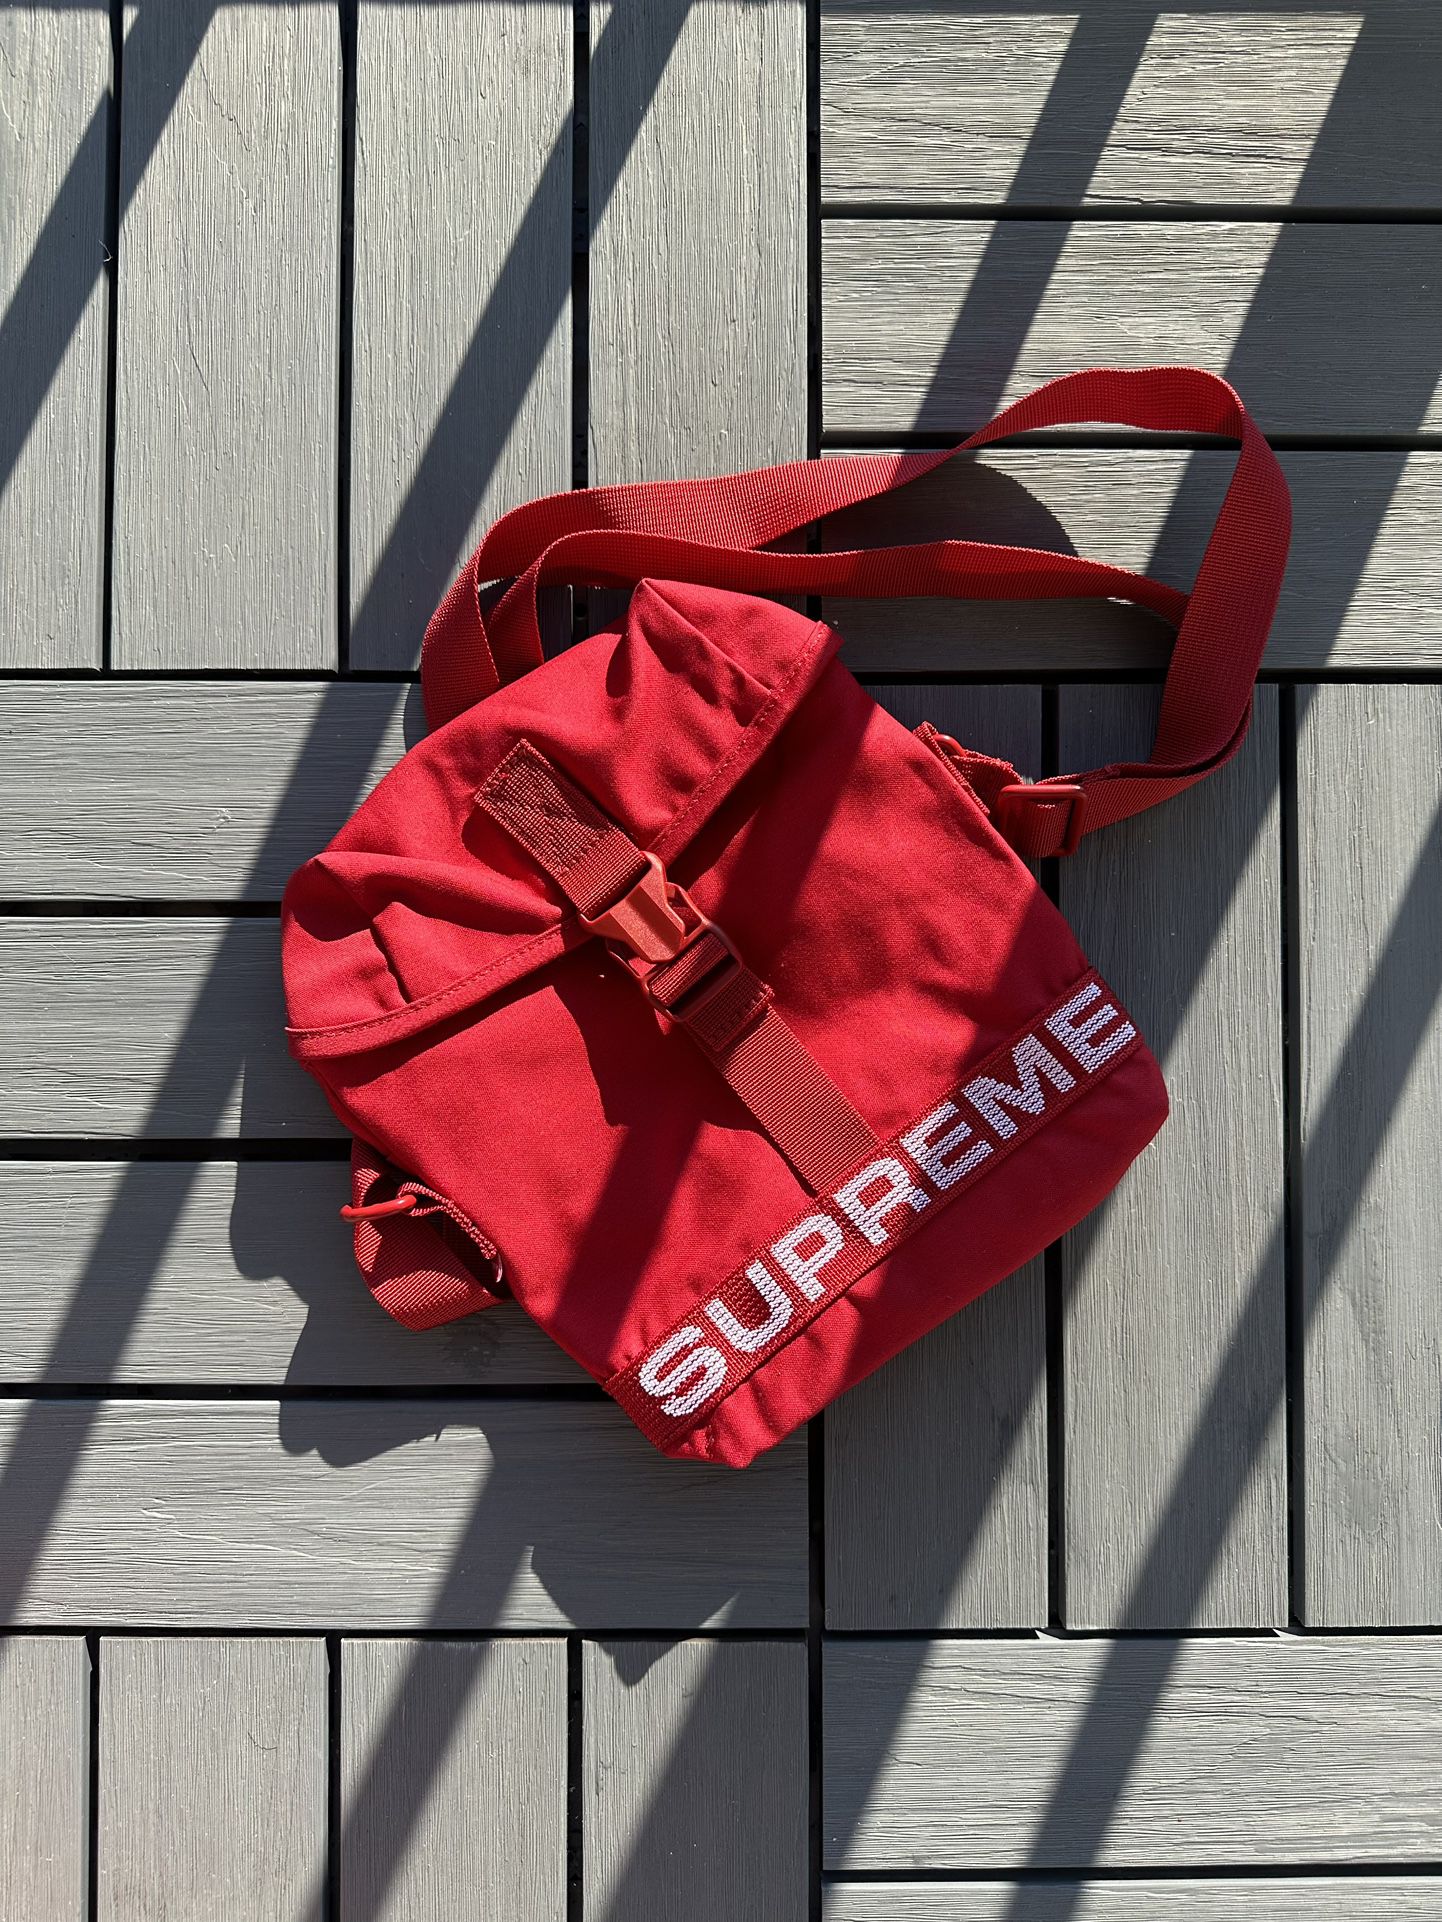 Supreme SS21 Camo Waist Bag Unsealed for Sale in Miami, FL - OfferUp